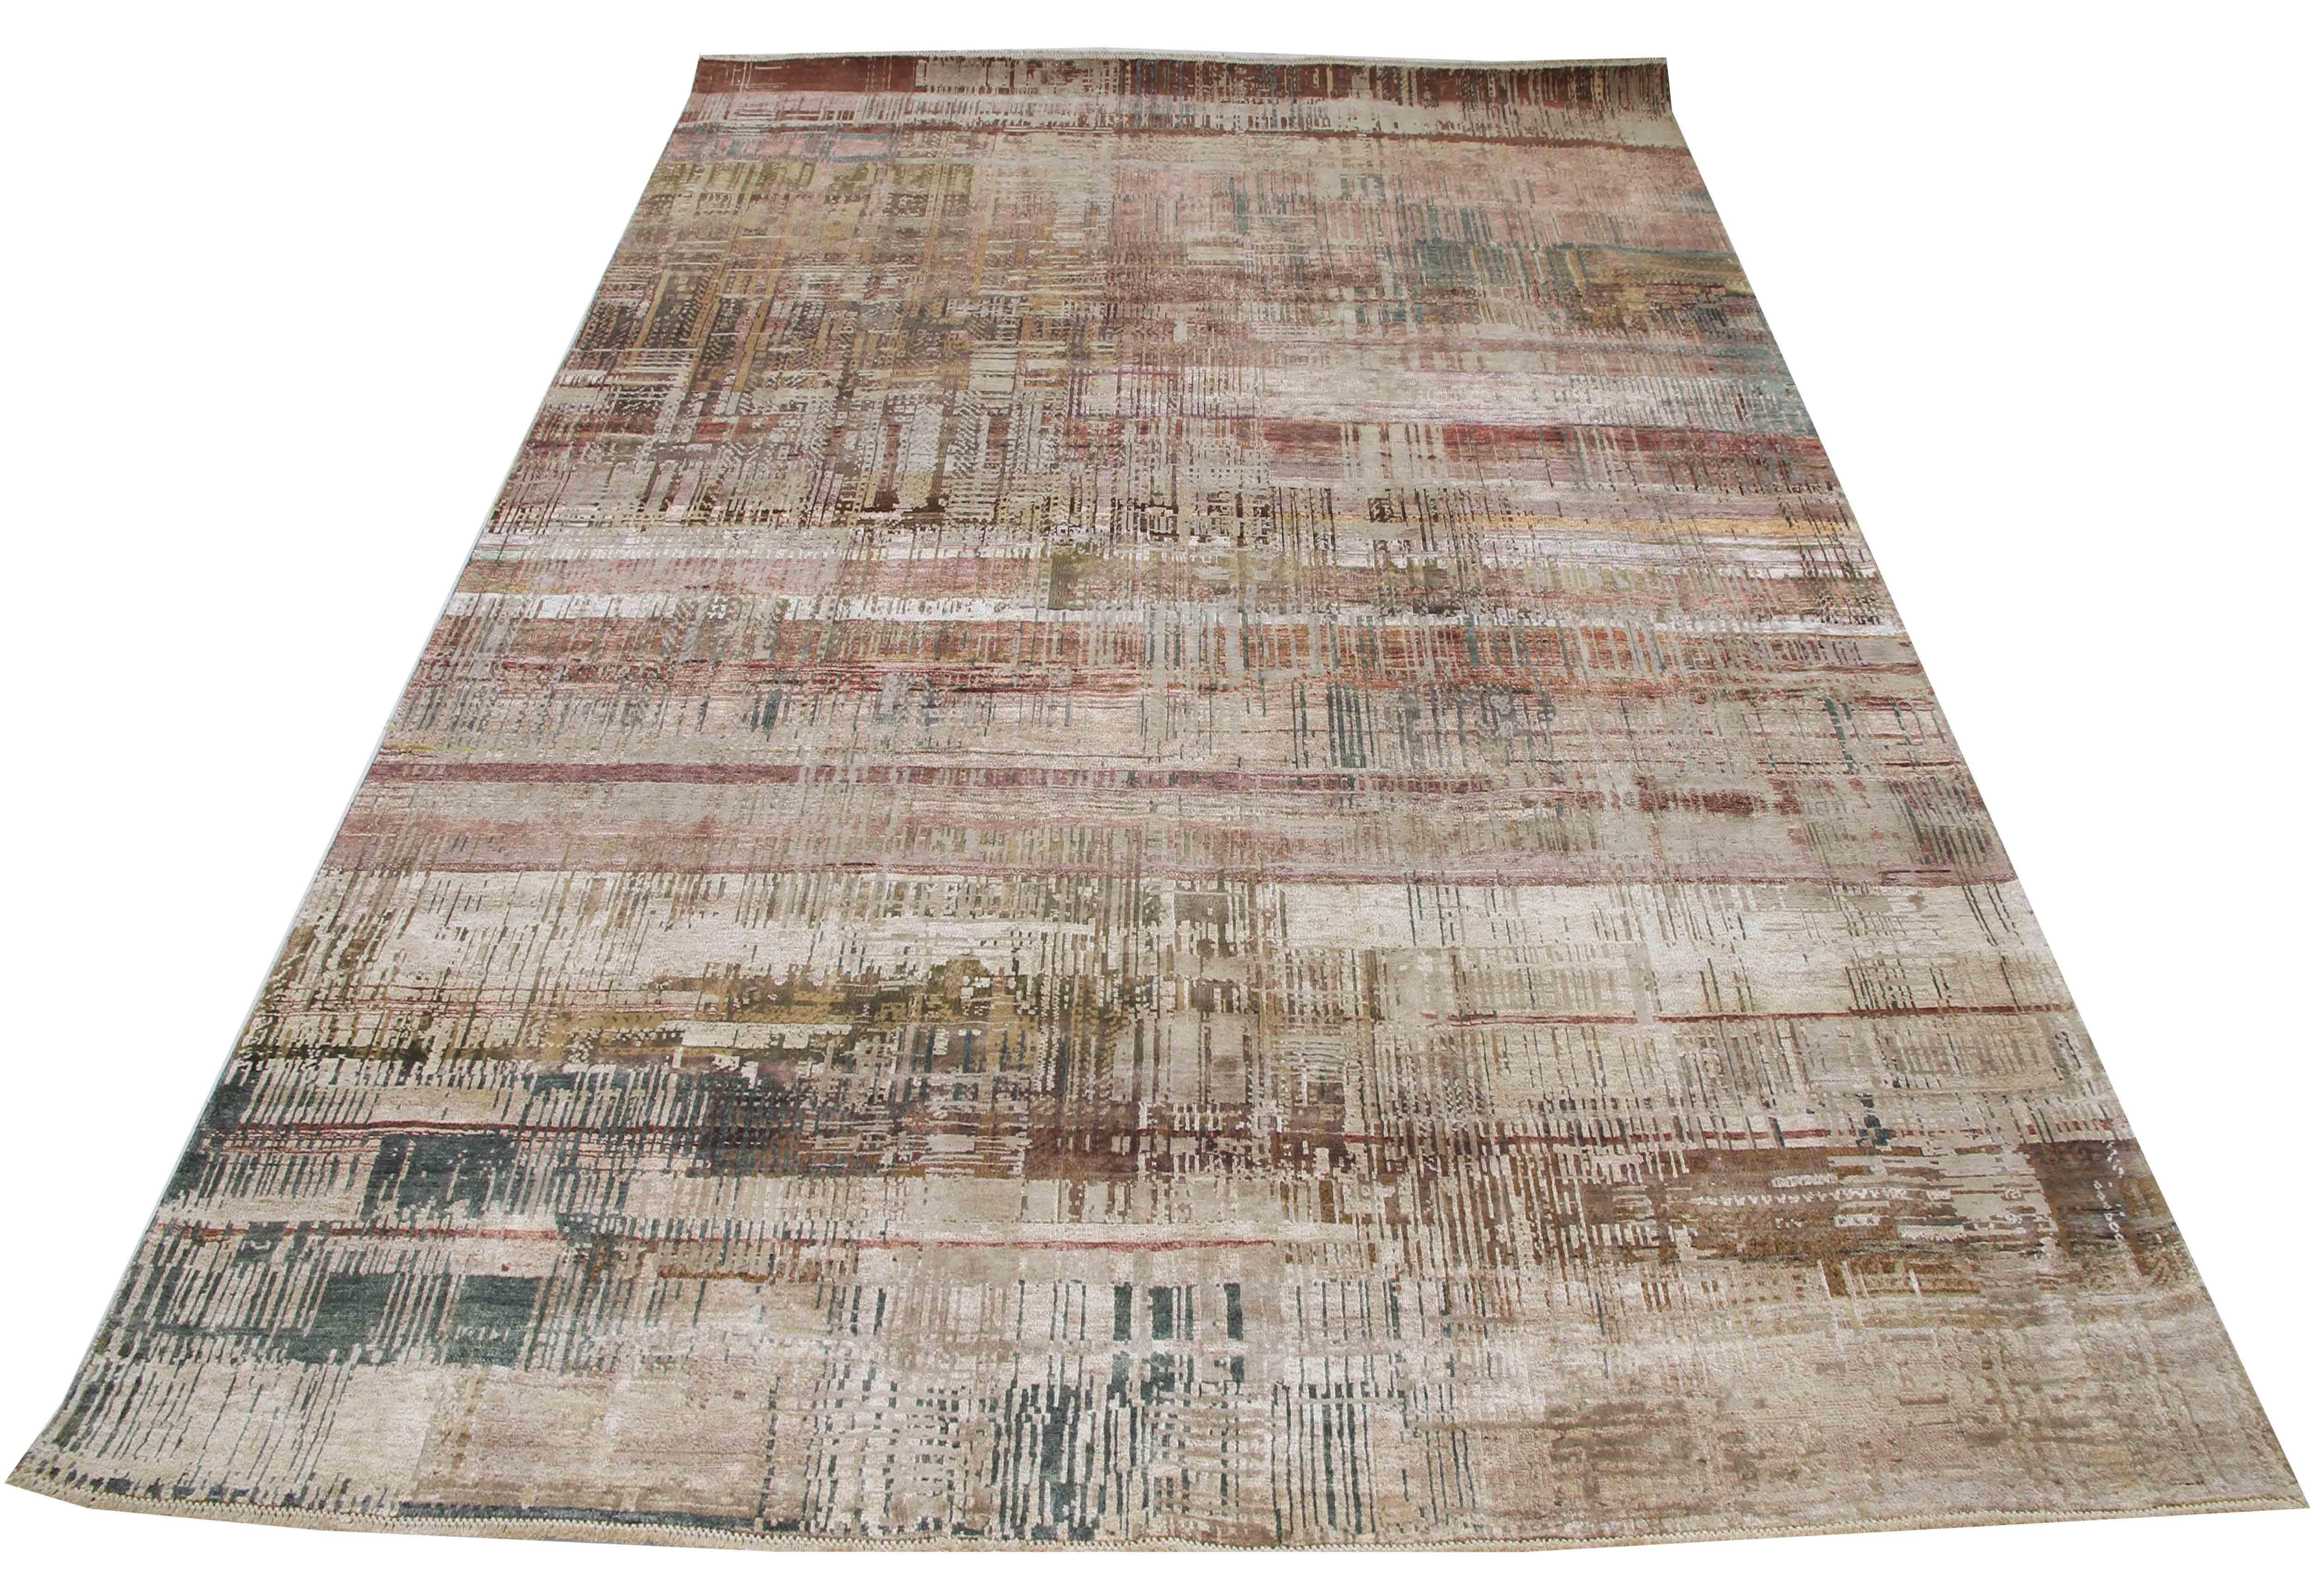 With clean lines and a contemporary design, this rug brings characteristic elegance into your space. Woven from high-quality silk & wool yarns; this rug features a textile-inspired design that does not break the artistic flow of the rug.